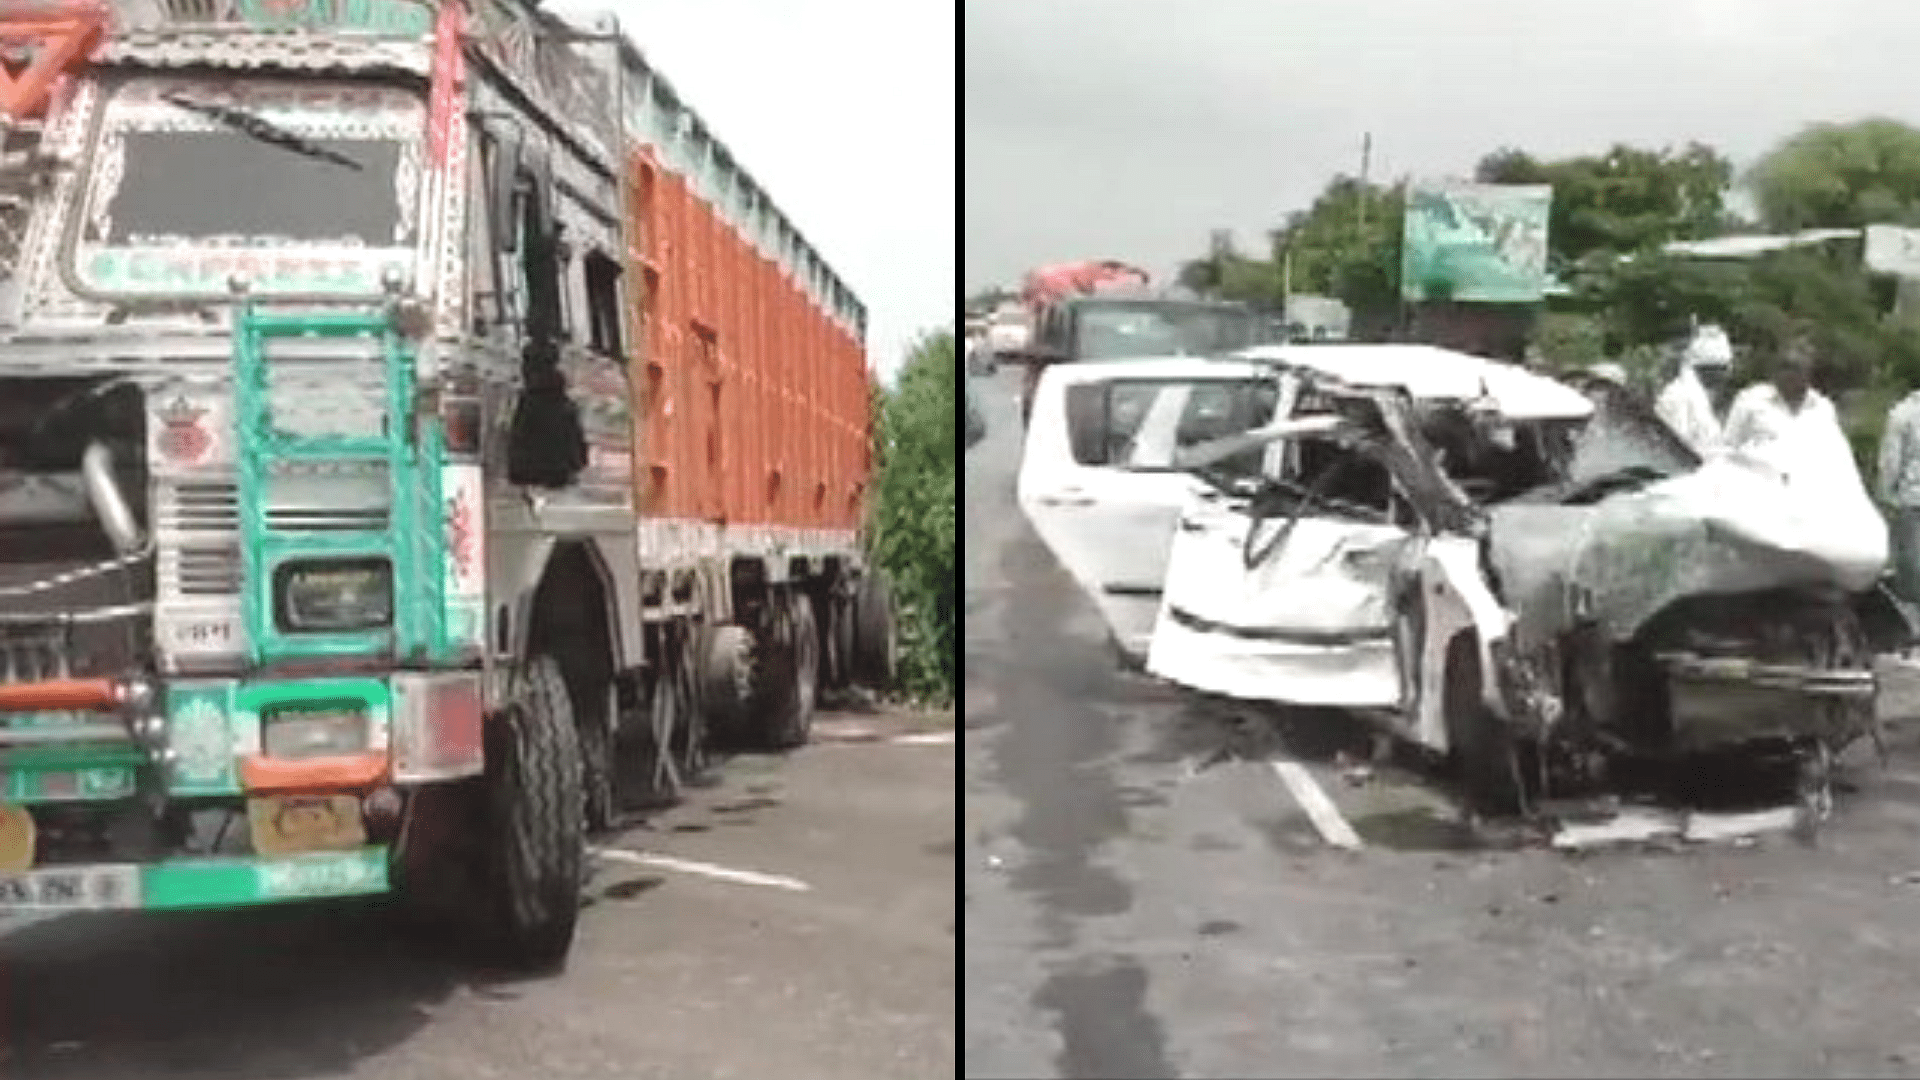  A speeding truck hit a car carrying the Unnao rape case survivor, critically injuring her and killing two of her relatives.